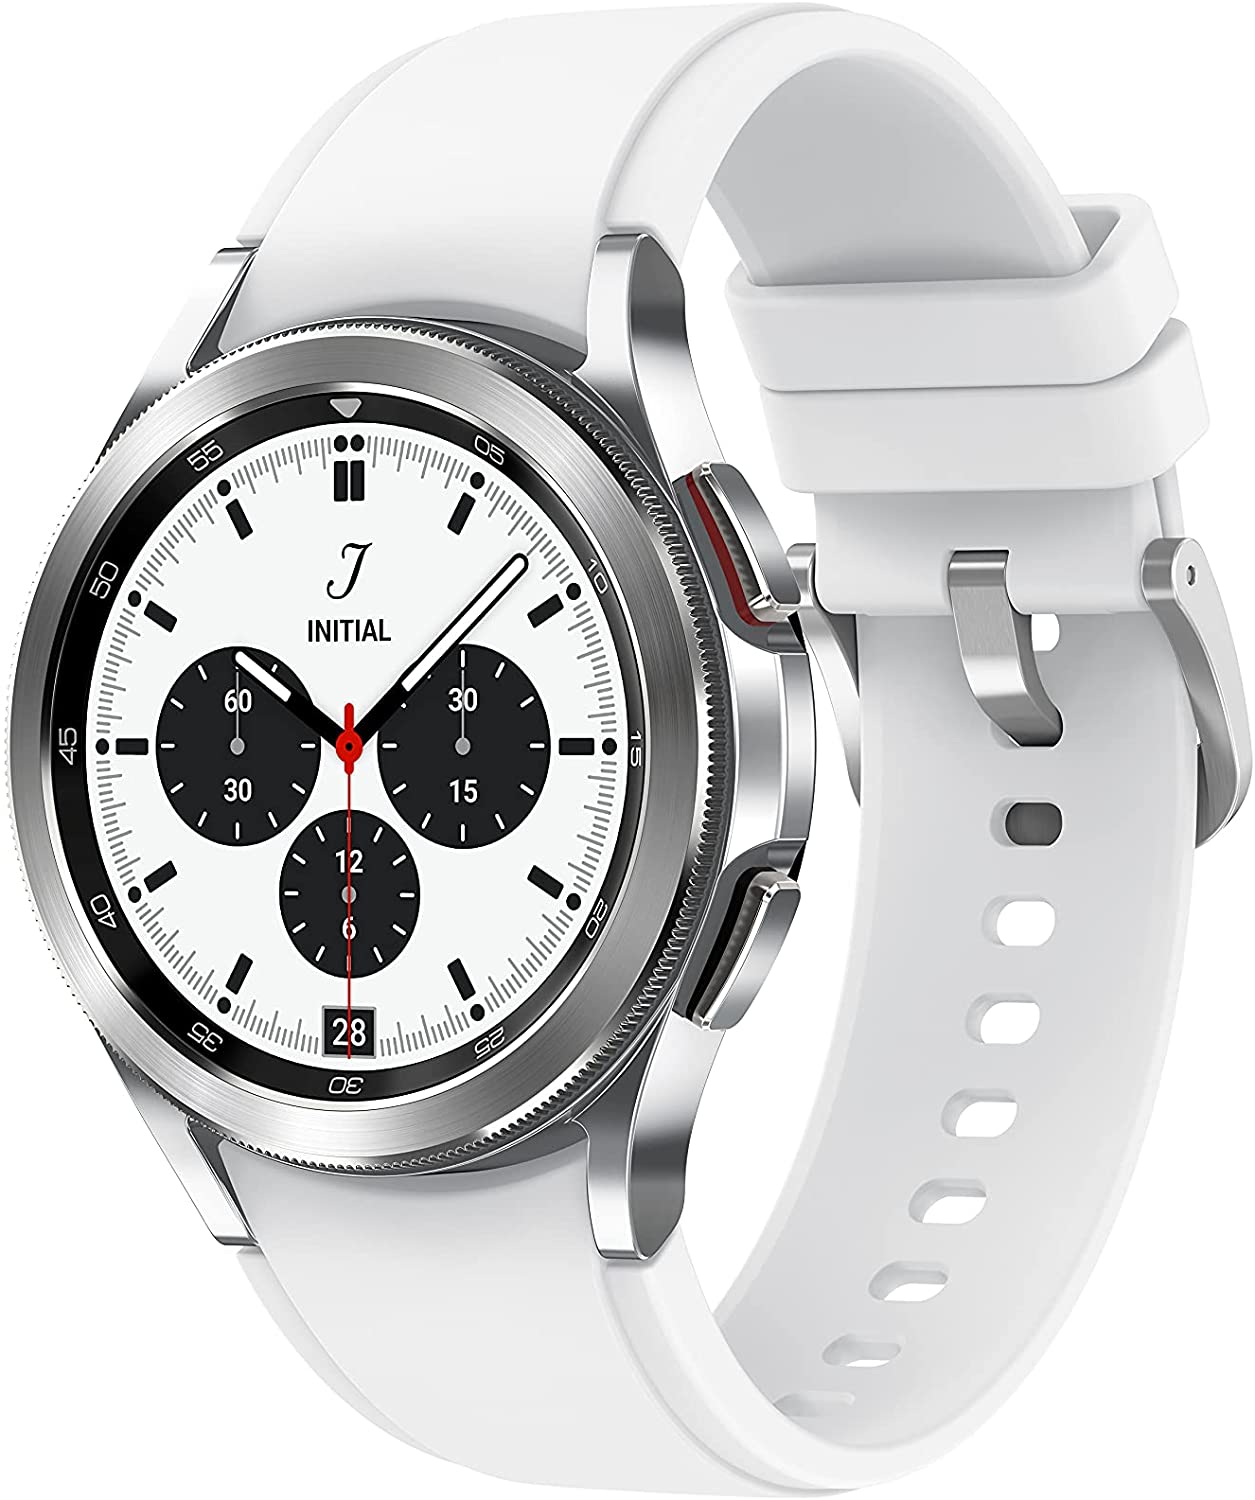 Samsung Galaxy Watch 4 Classic (42mm) Full Specifications, Features